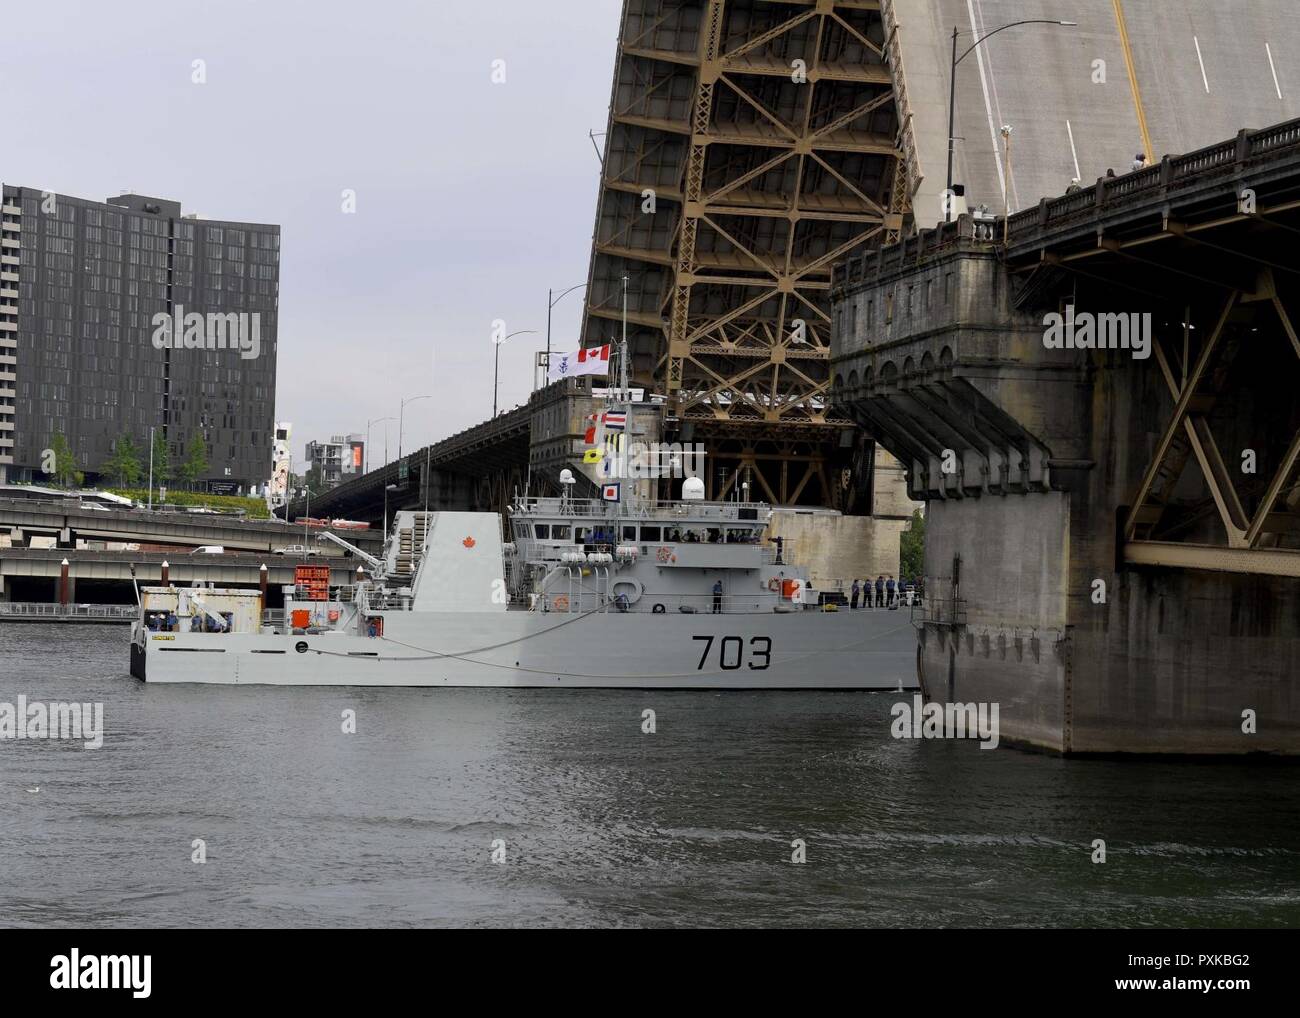 PORTLAND, Ore. (June 7, 2017) The Kingston-class coastal defense vessel HMCS Edmonton (MM 703) arrives at the Portland riverfront for Rose Festival Fleet Week. The festival and Portland Fleet Week are a celebration of the sea services with Sailors, Marines, and Coast Guard members from the U.S. and Canada making the city a port of call. Stock Photo